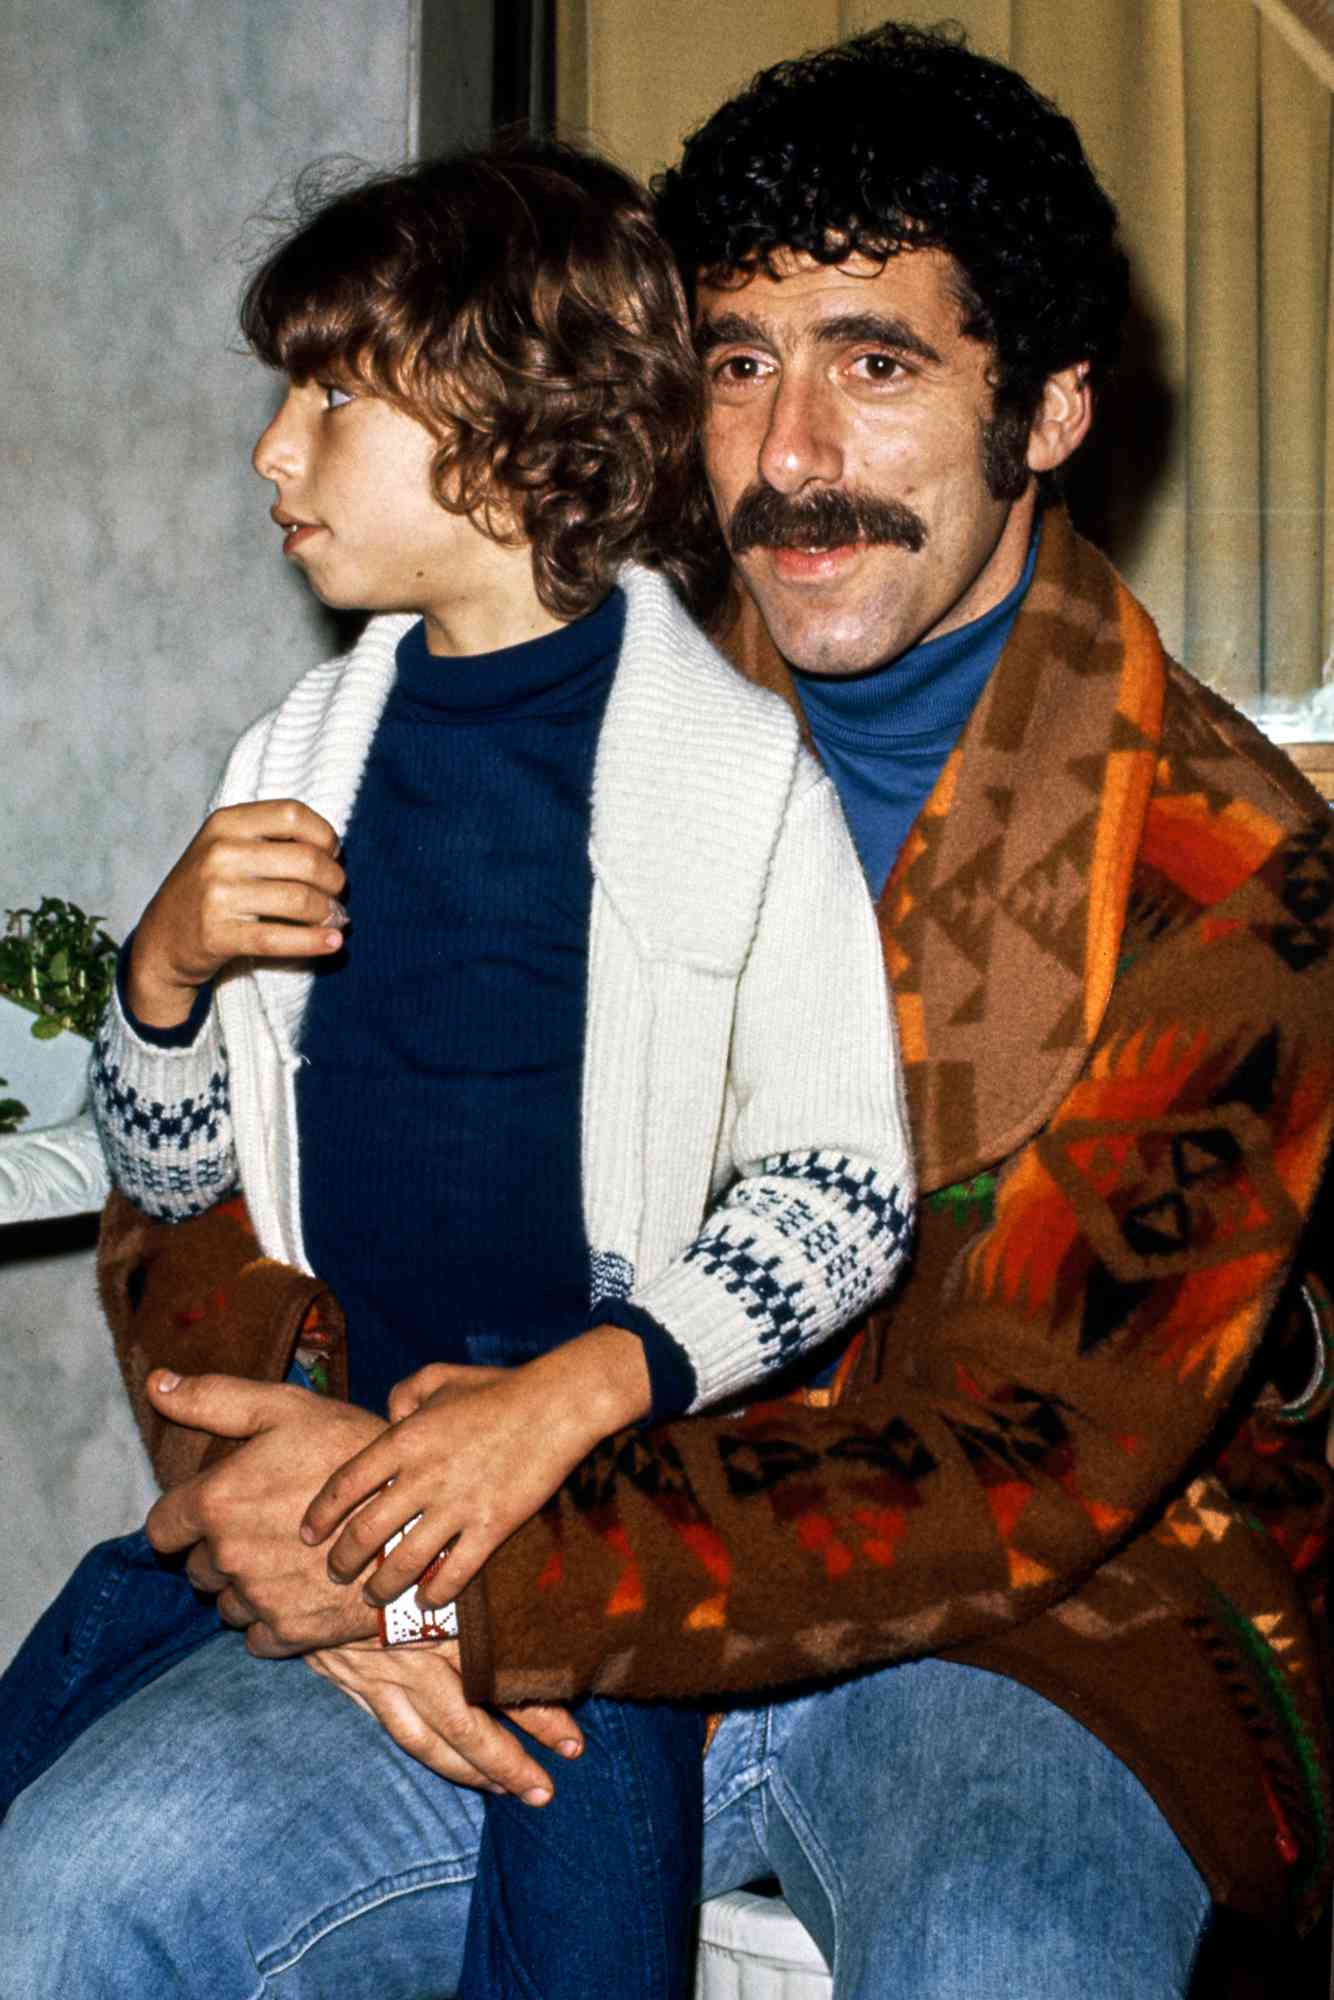 American actor Elliott Gould attends an event with his son Jason Gould, US, circa 1975.